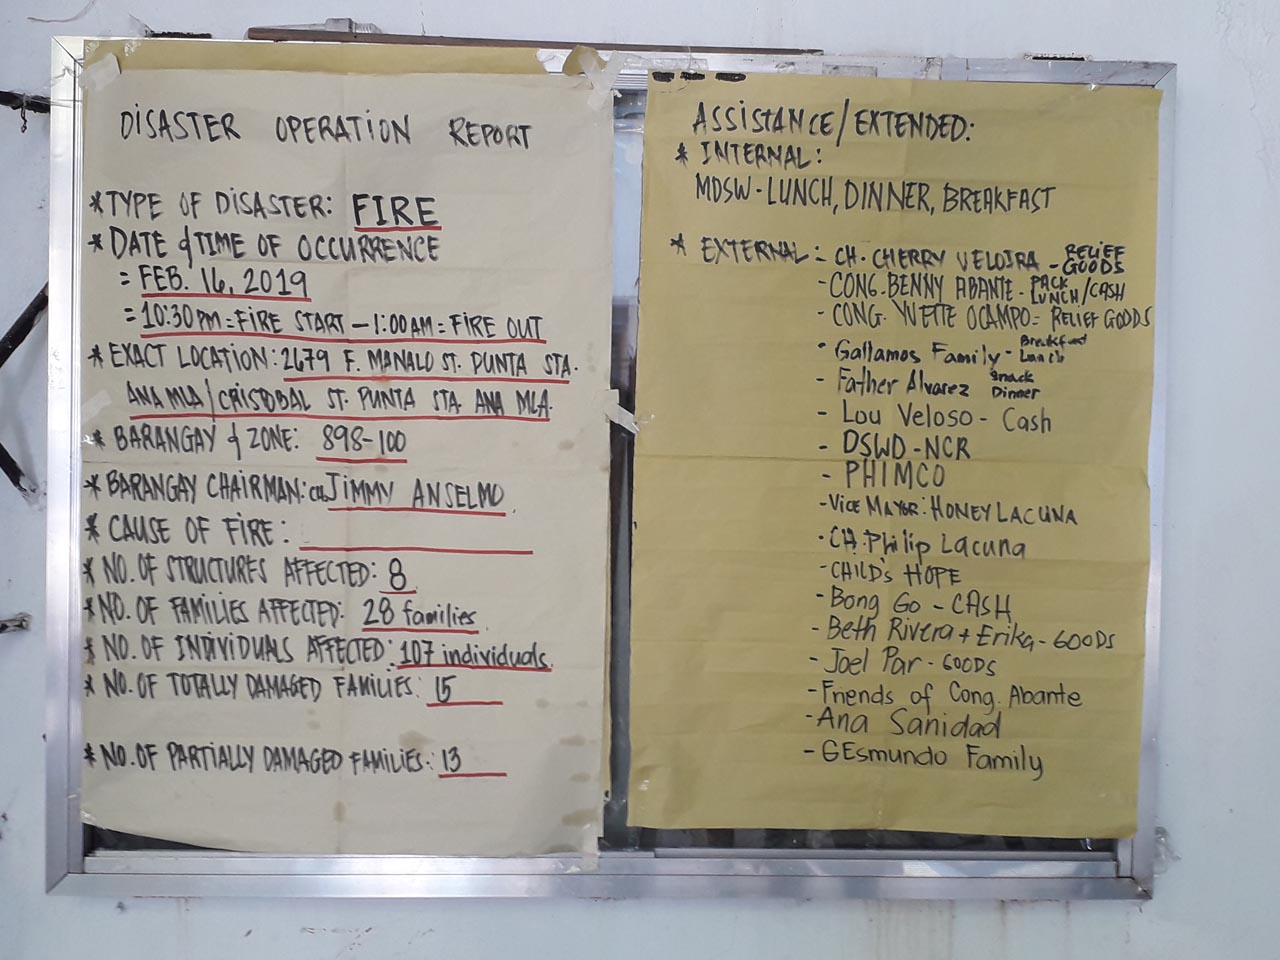 'CASH' FROM BONG GO. Bong Go listed as the source of a cash donation in this tally of assistance in Barangay 898 for fire victims. Photo by Pia Ranada / Rappler 